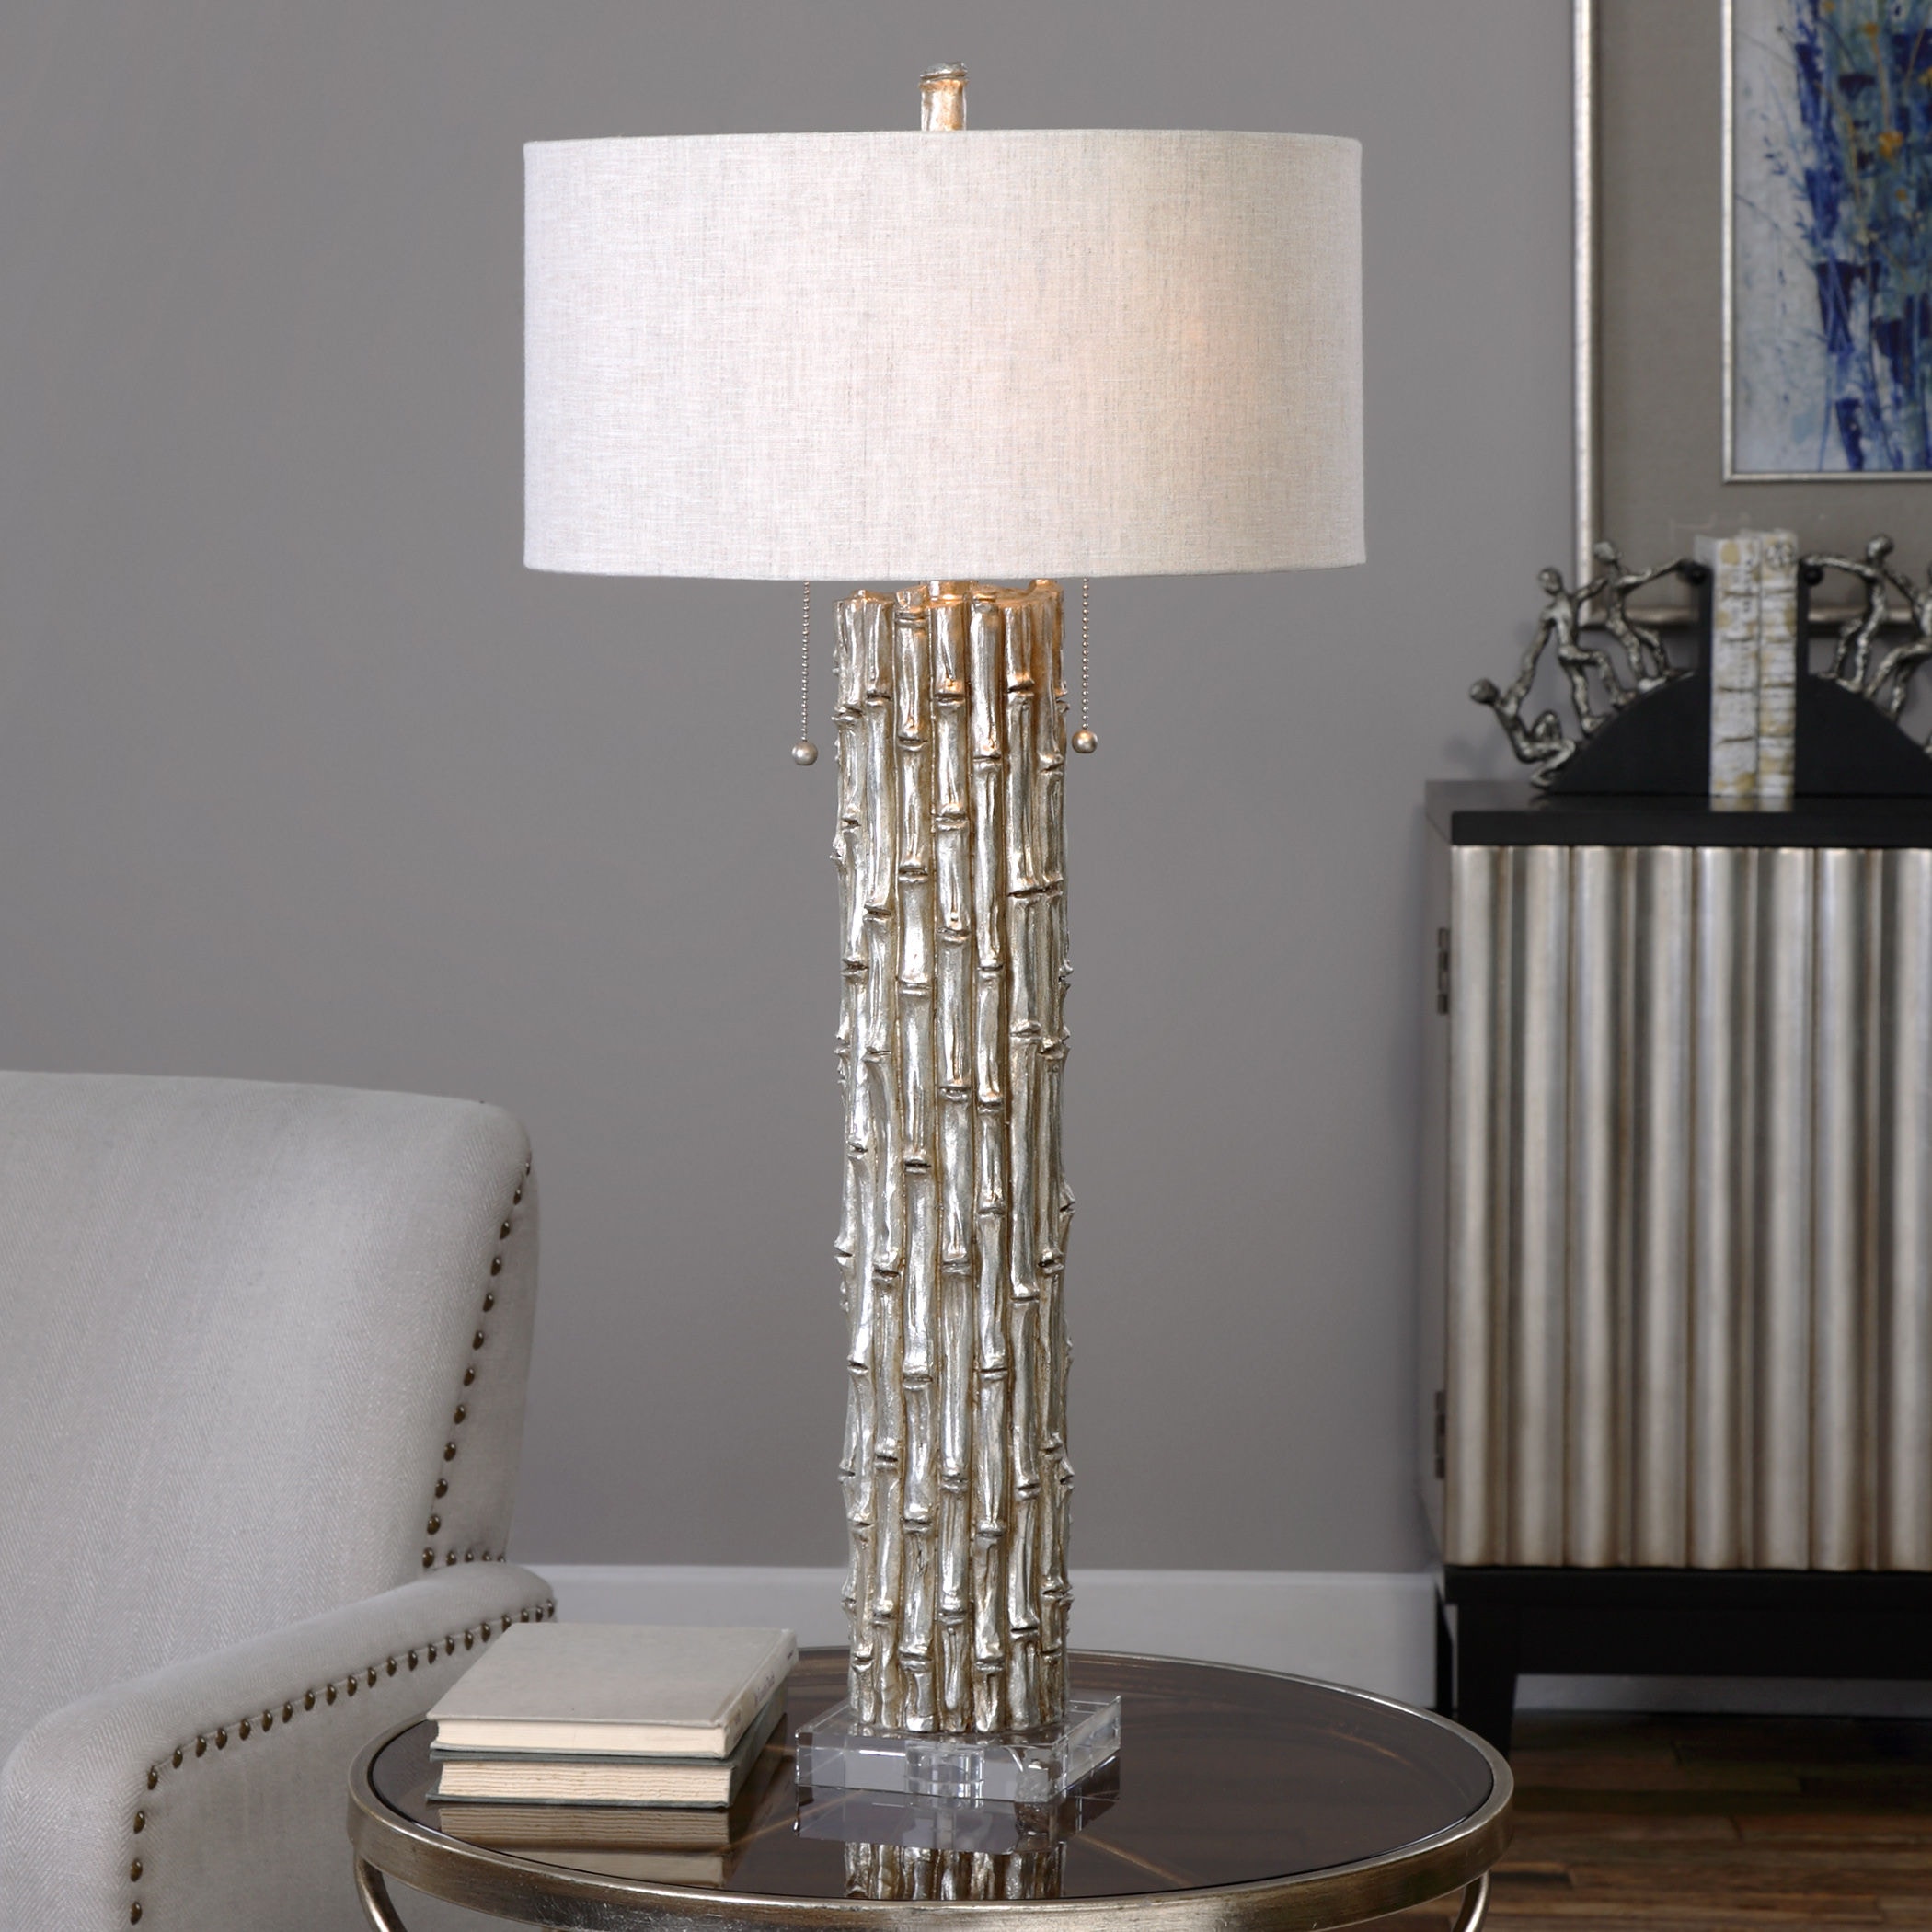 Fireplace Lamp Best Of Uttermost Lamps and Lighting Silver Bamboo Table Lamp Ut Walter E Smithe Furniture Design